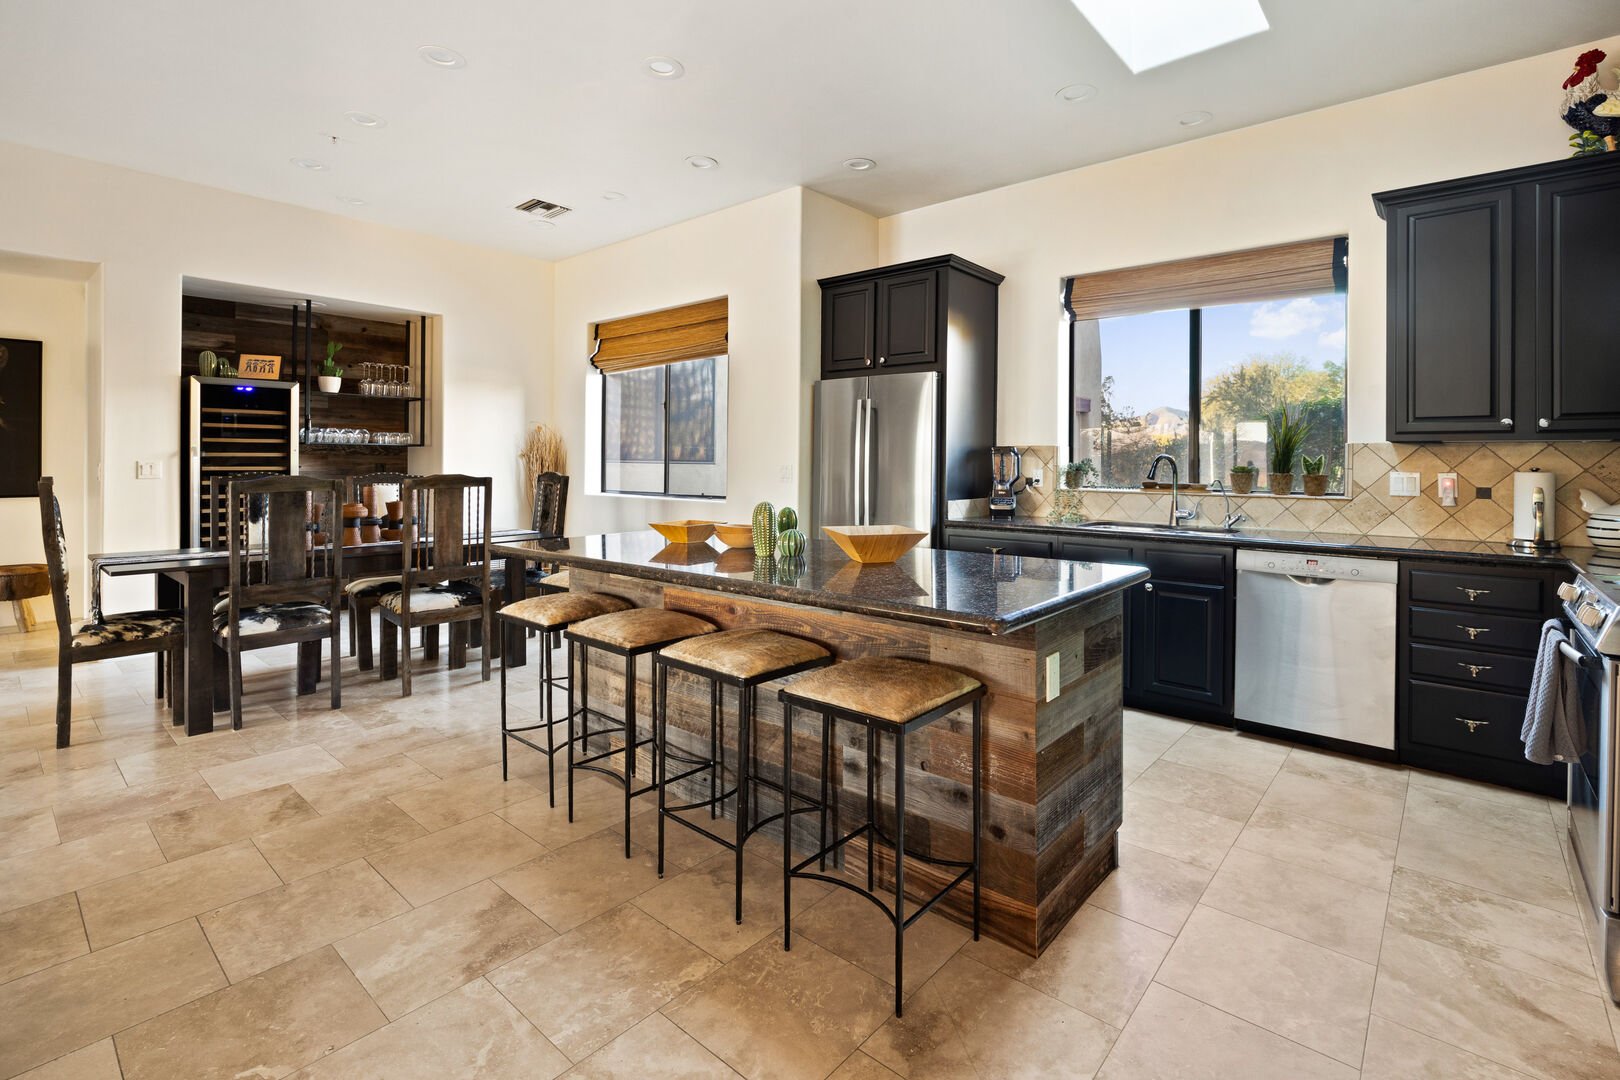 A 6 person dining table and 4 barstools at the kitchen island.